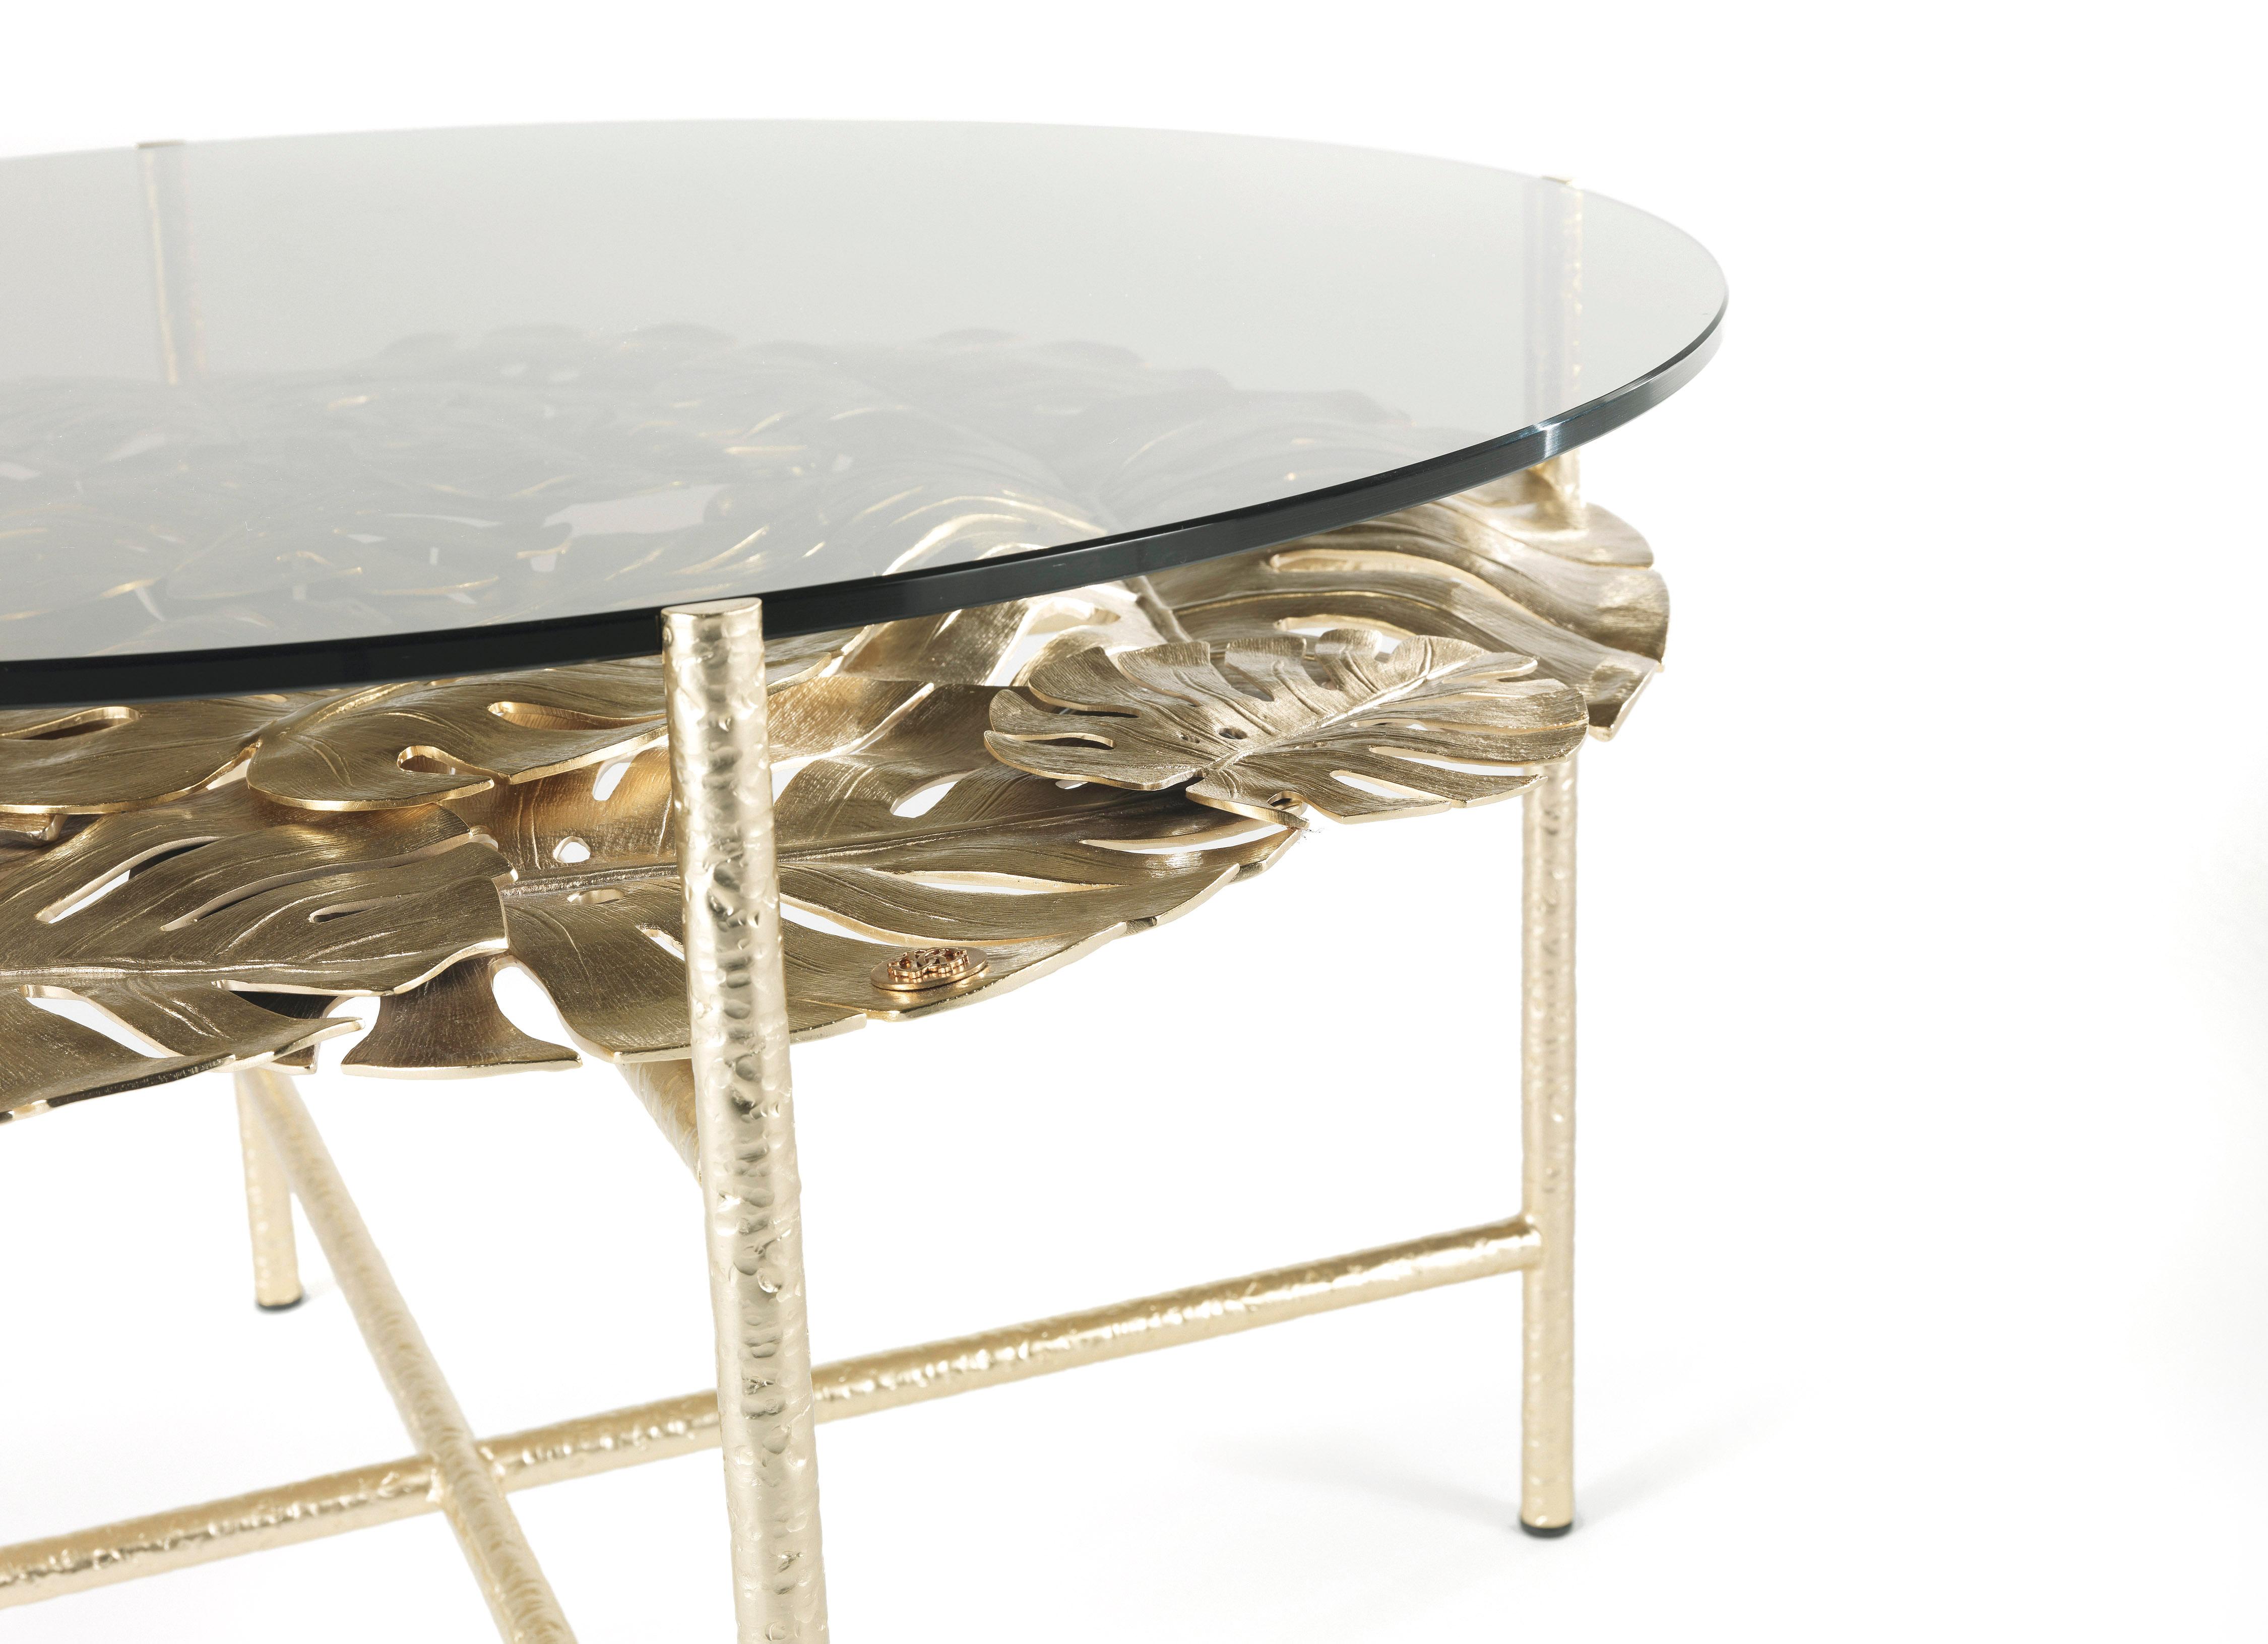 Modern 21st Century Maui Side Table in Brass by Roberto Cavalli Home Interiors For Sale